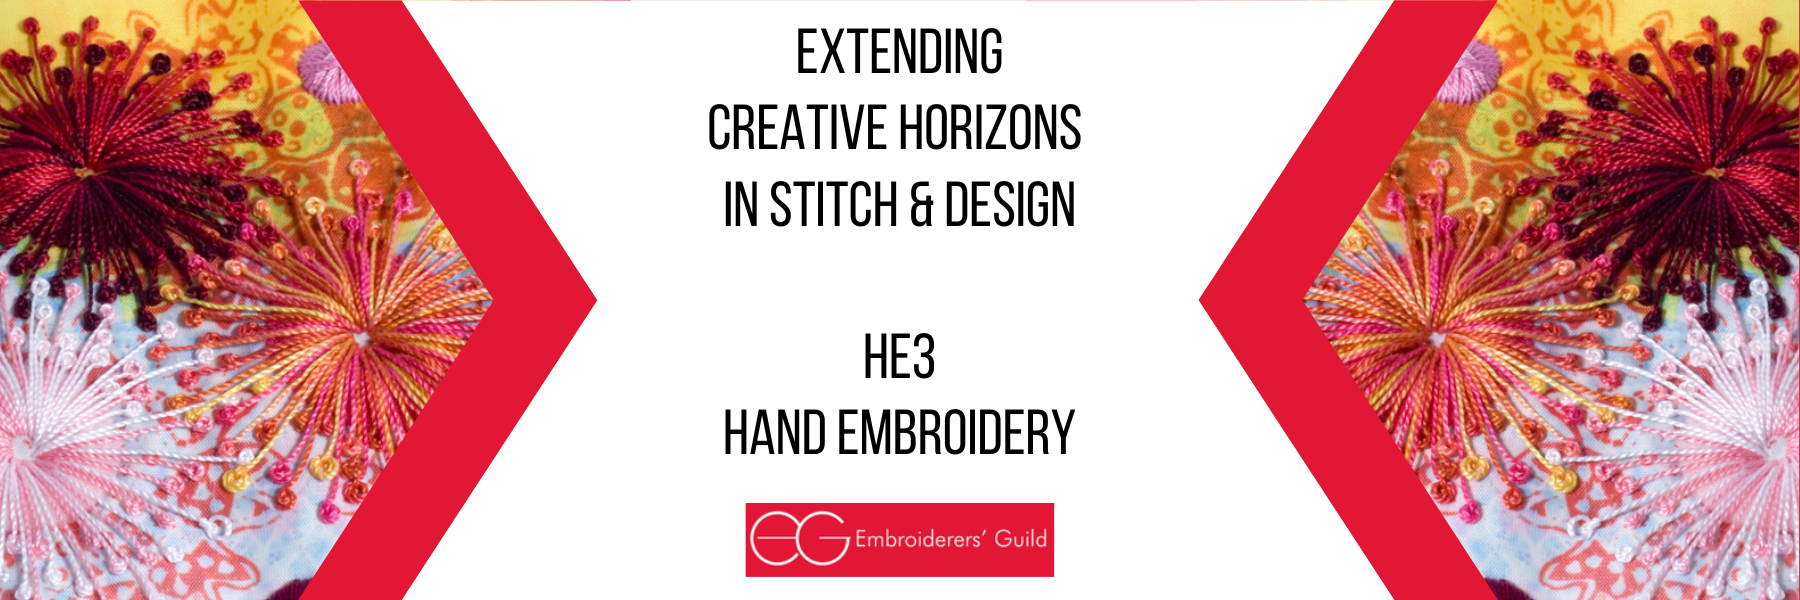 exploring opportunities in stitch & design in hand embroidery online course from The Embroiderers Guild